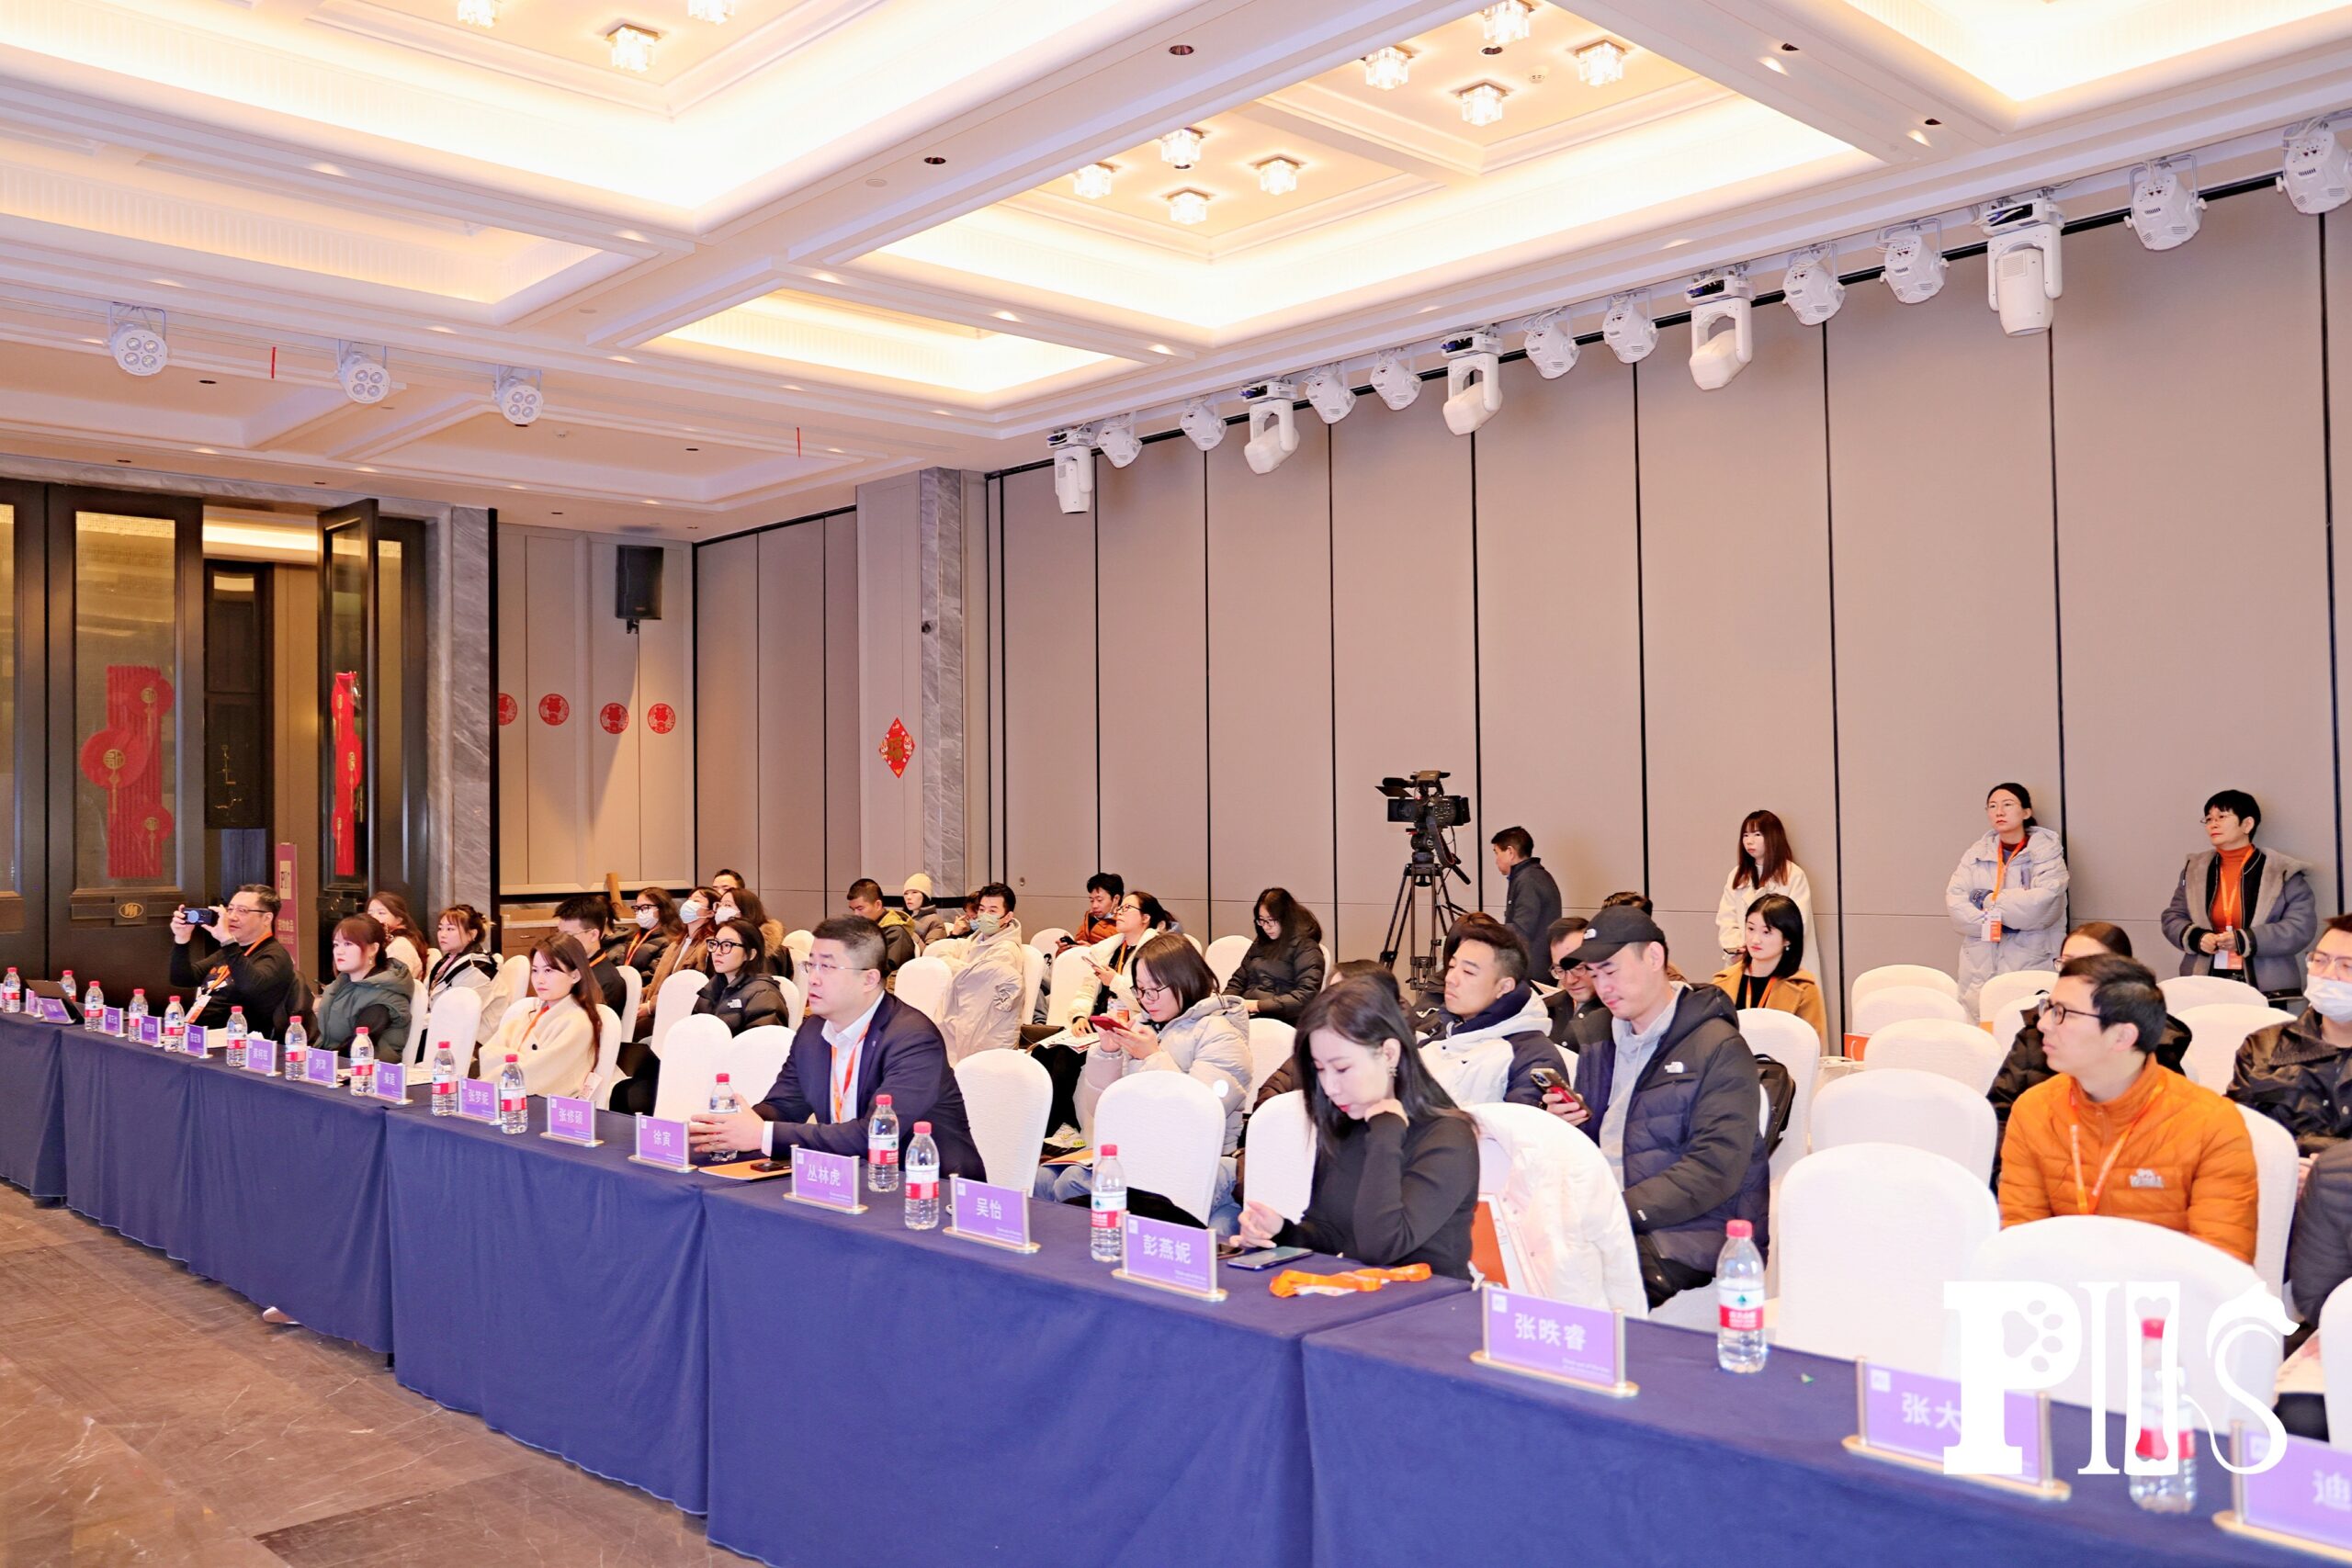 PIIS Pet Industry Innovation Forum was a hot event